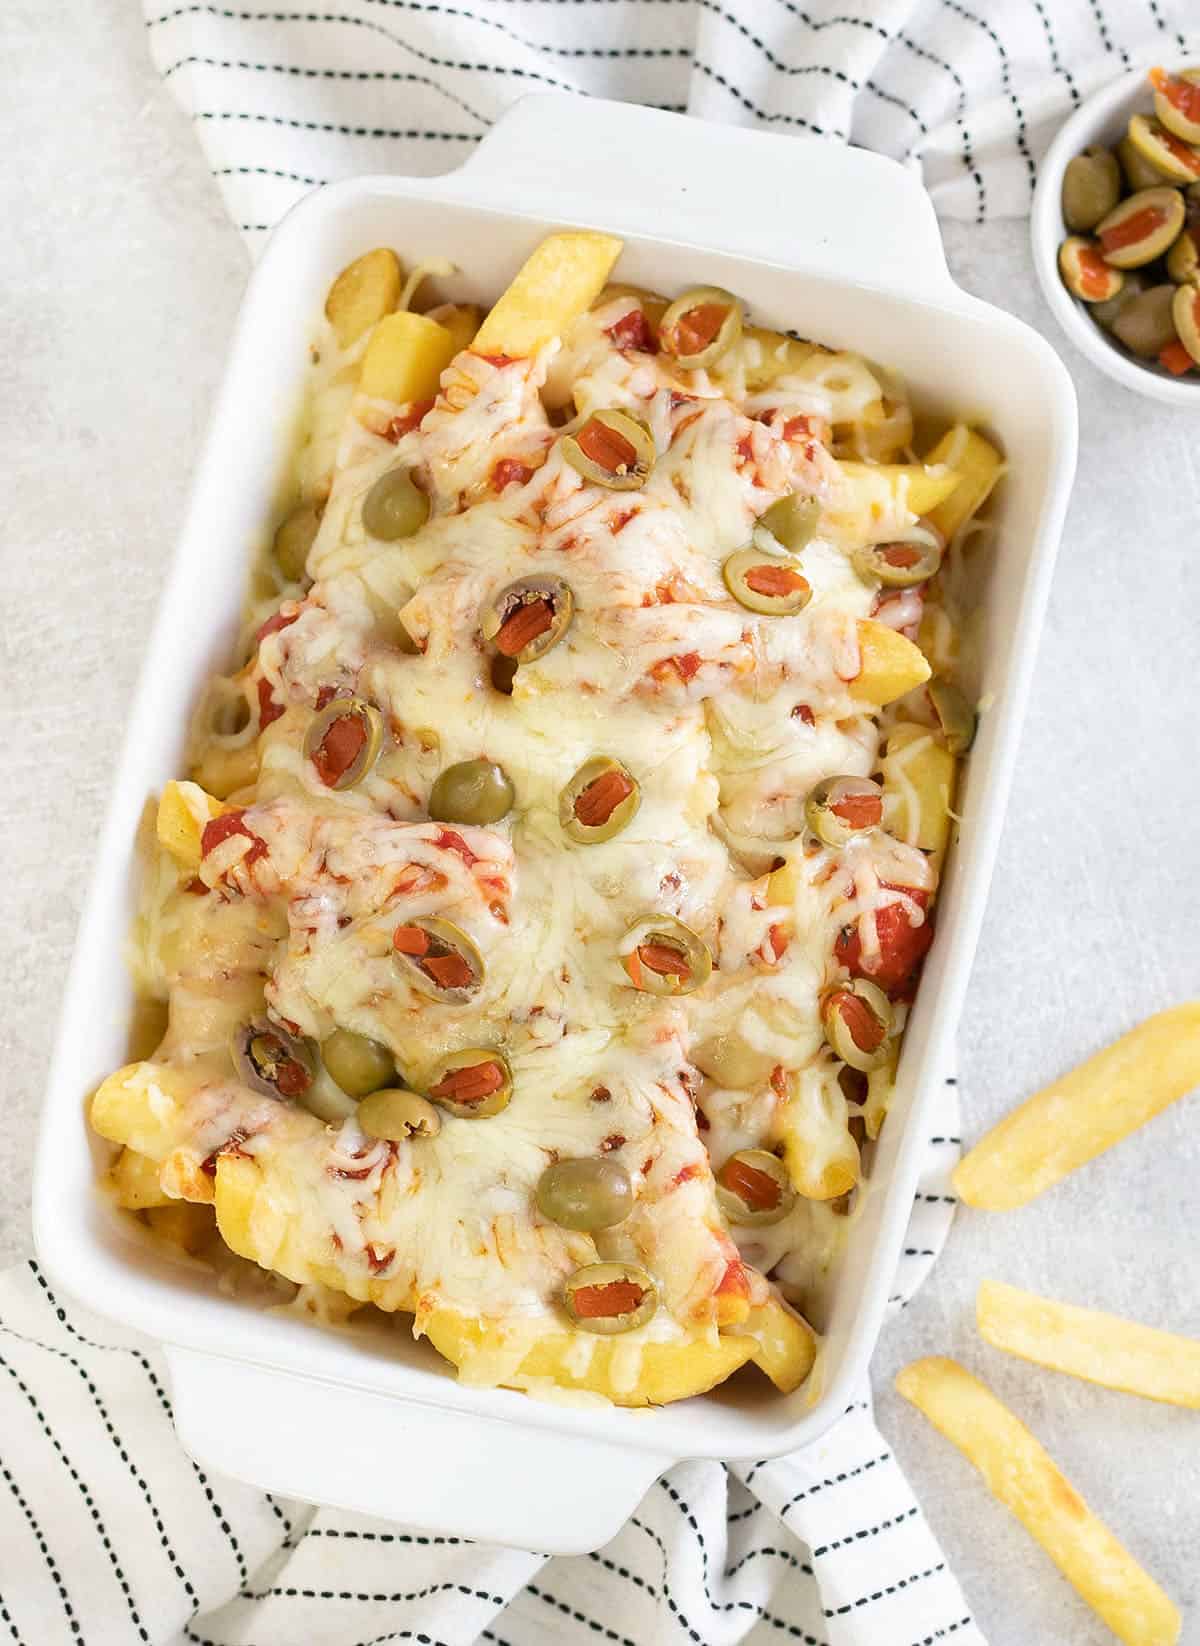 baking dish full of Pizza Fries topped with cheese and olives.